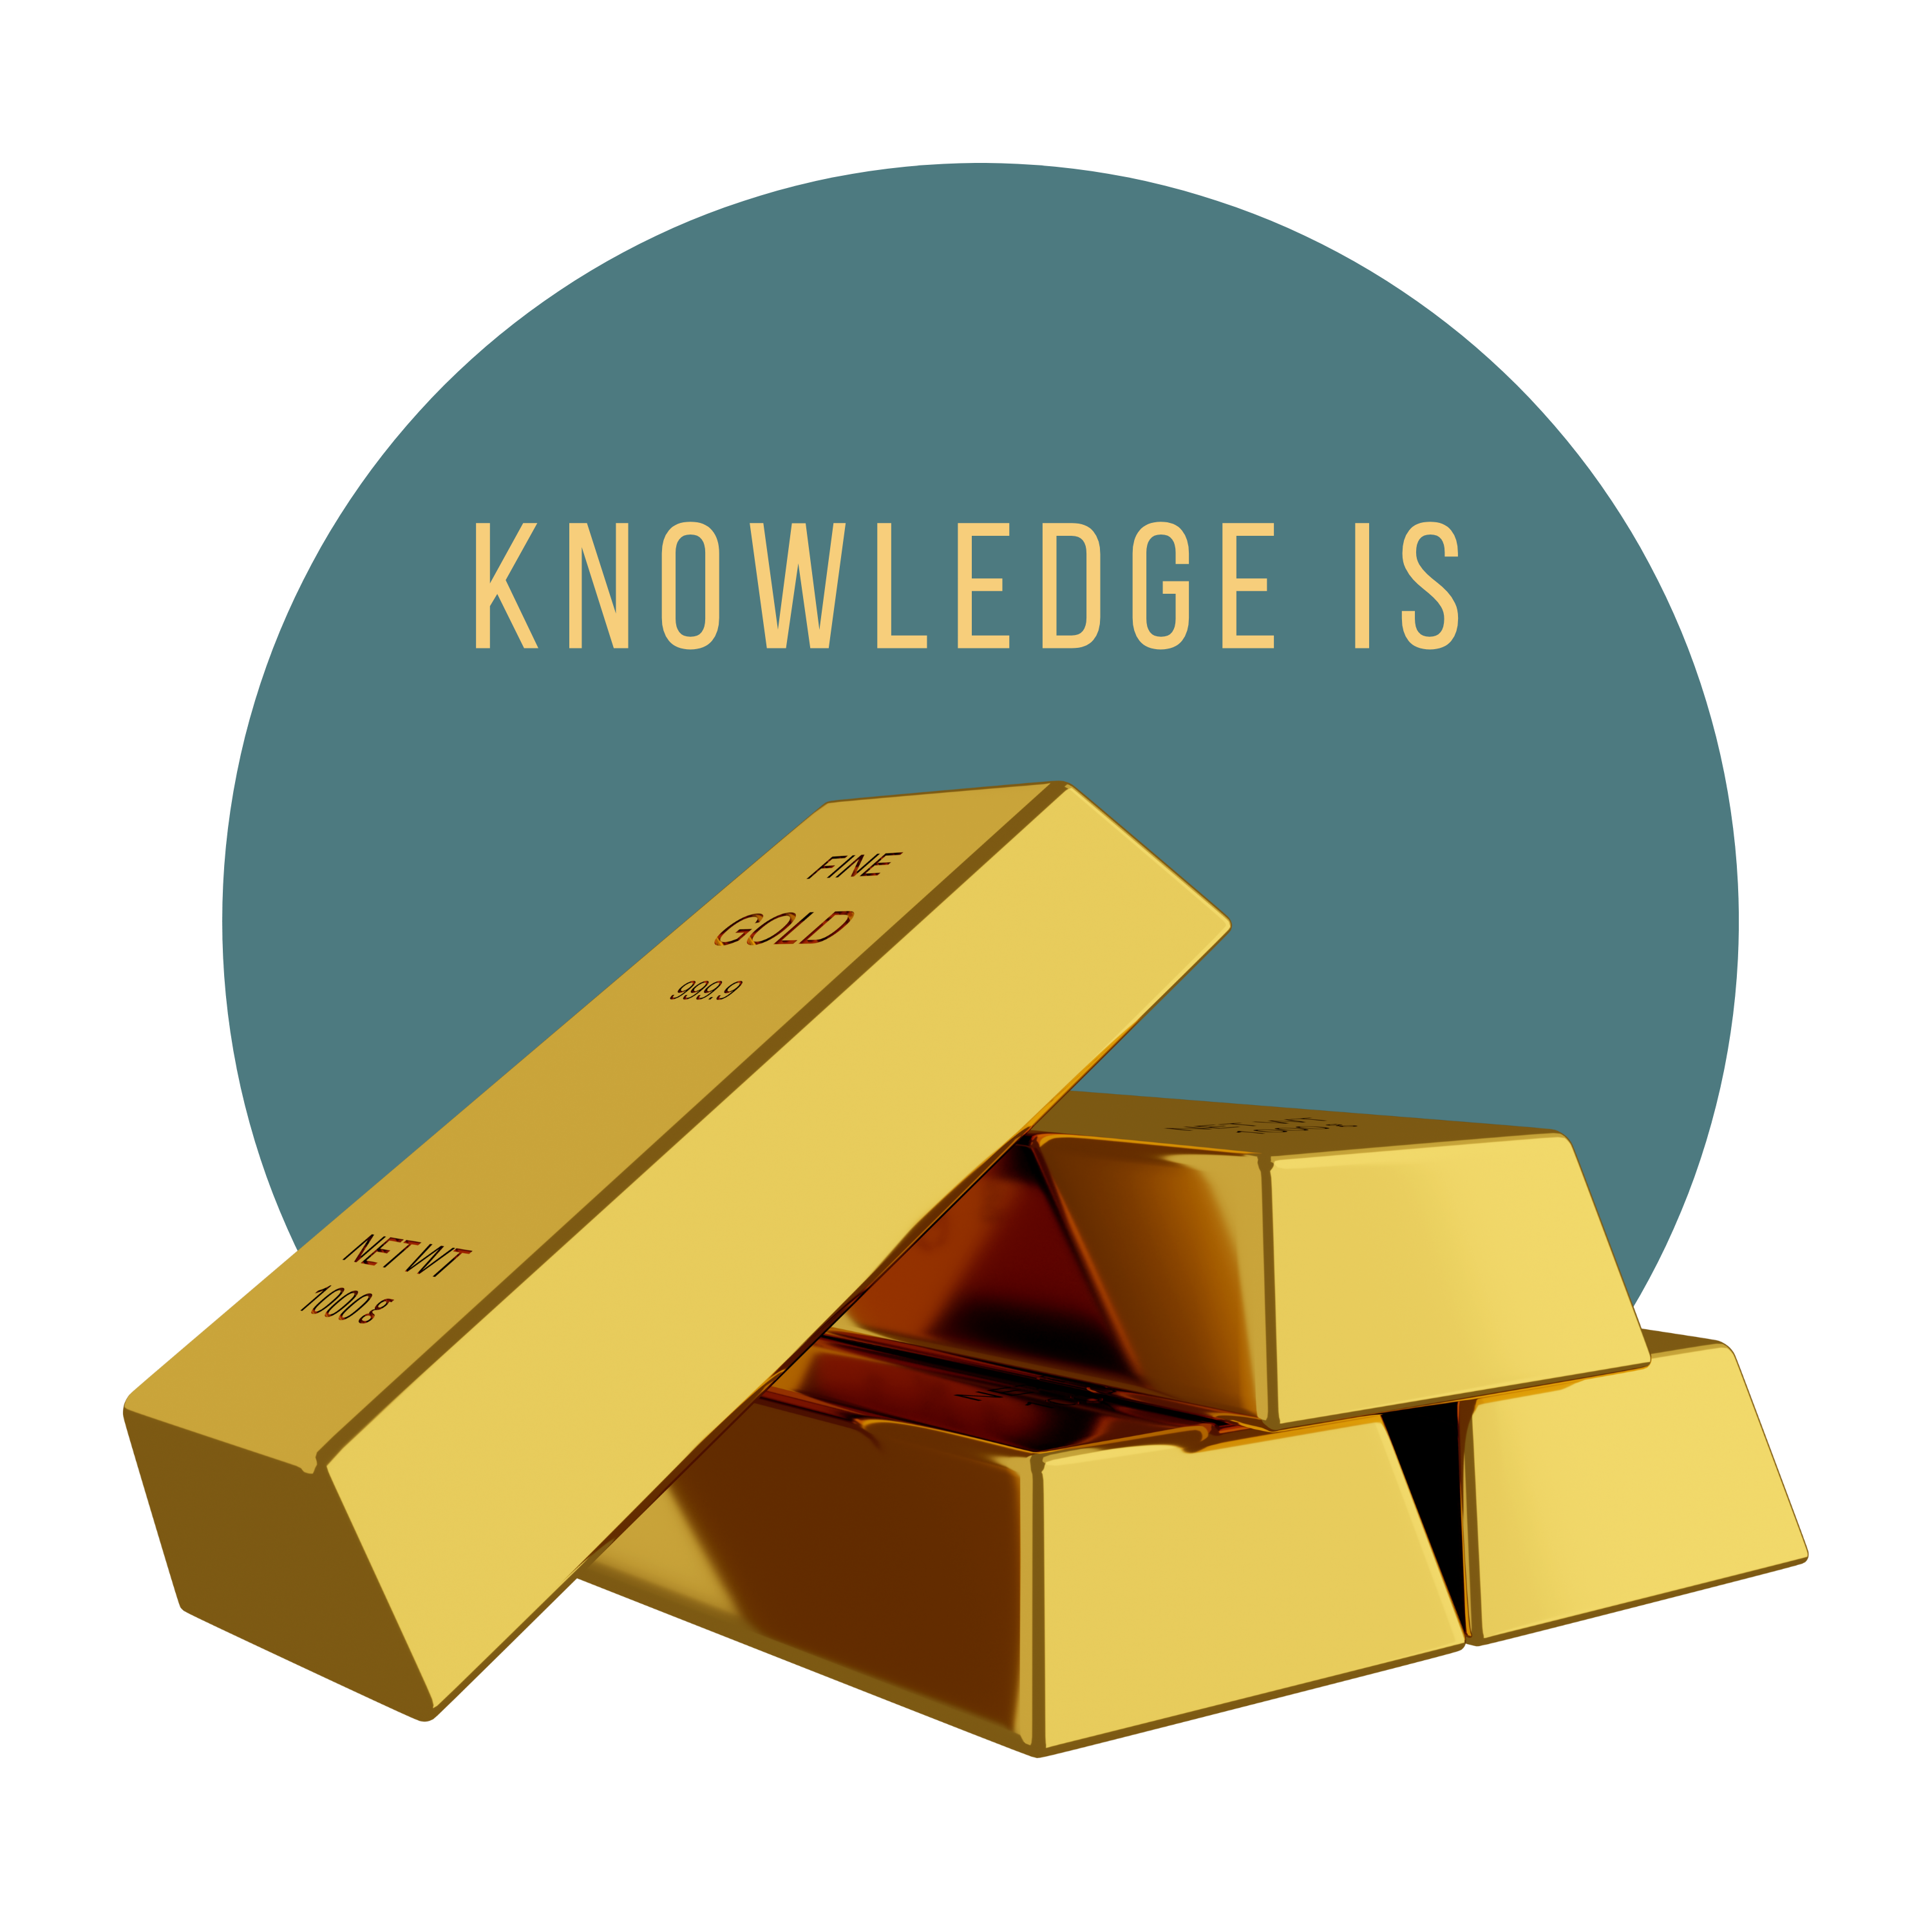 your knowledge is gold and it will sell. This is one way you can start an online business.